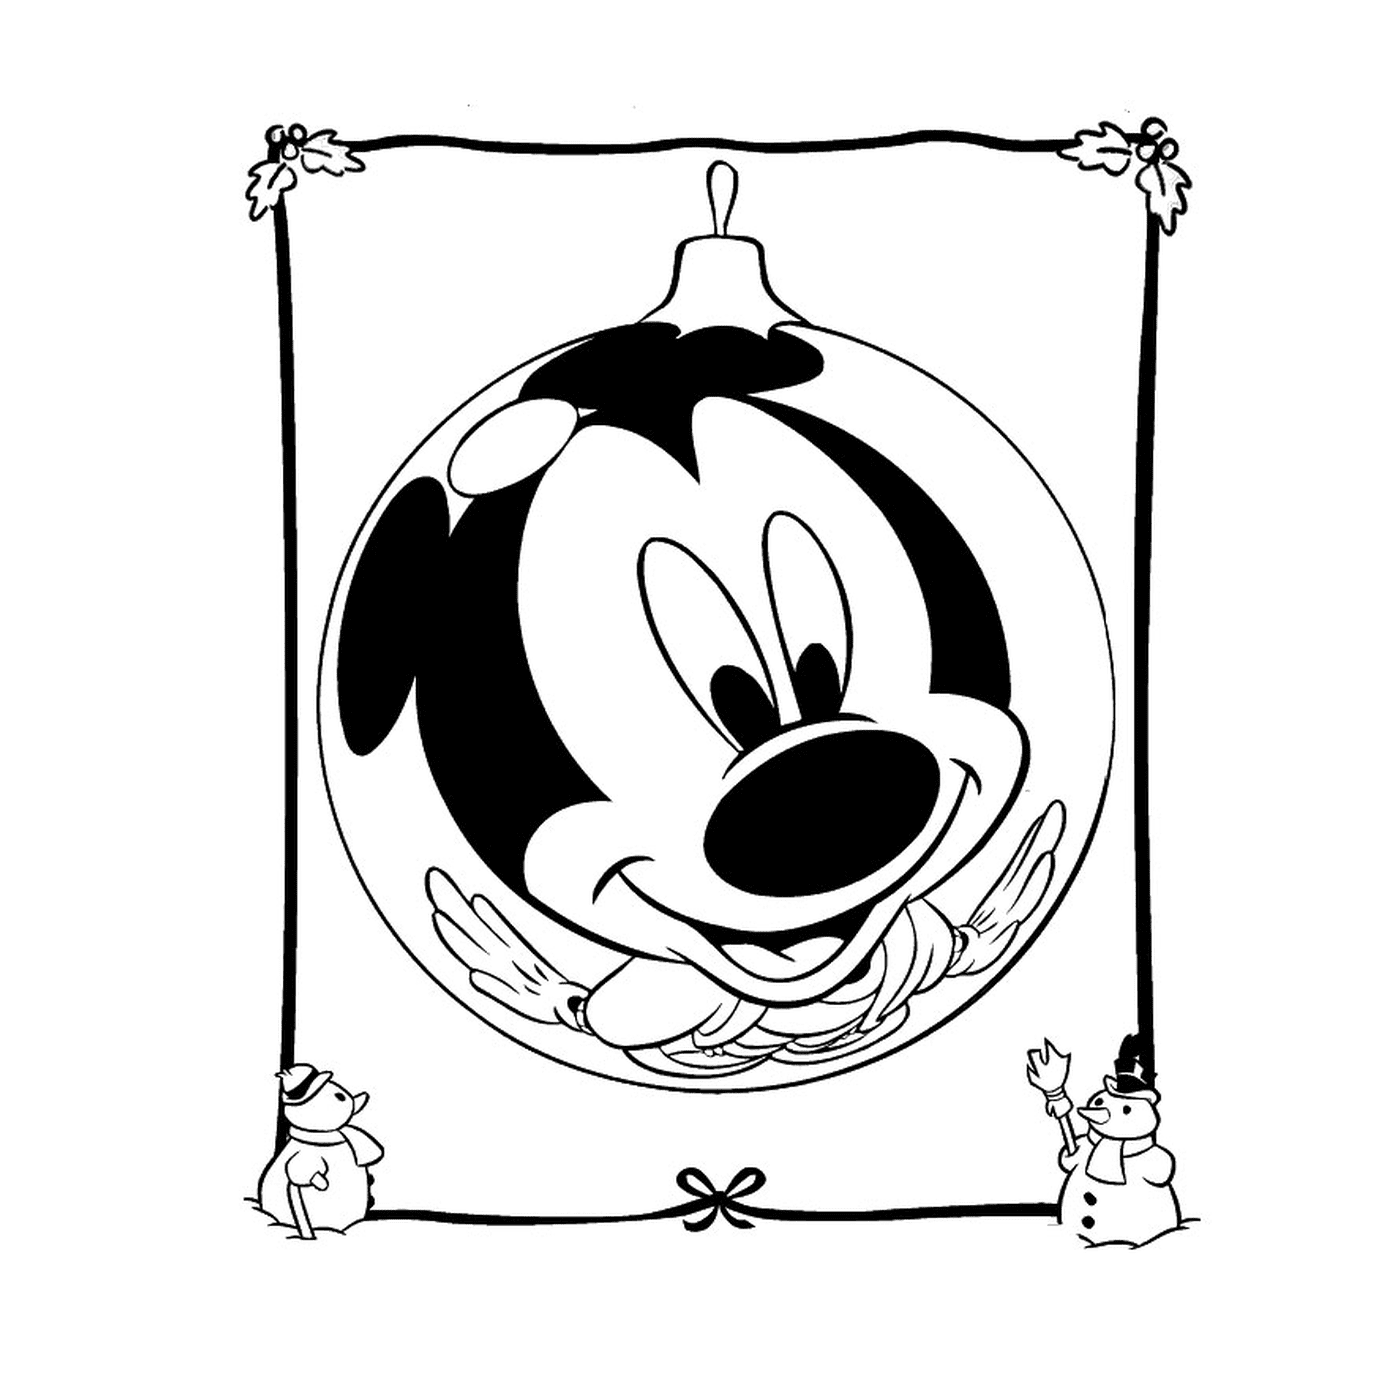  Mickey Mouse from Disney 